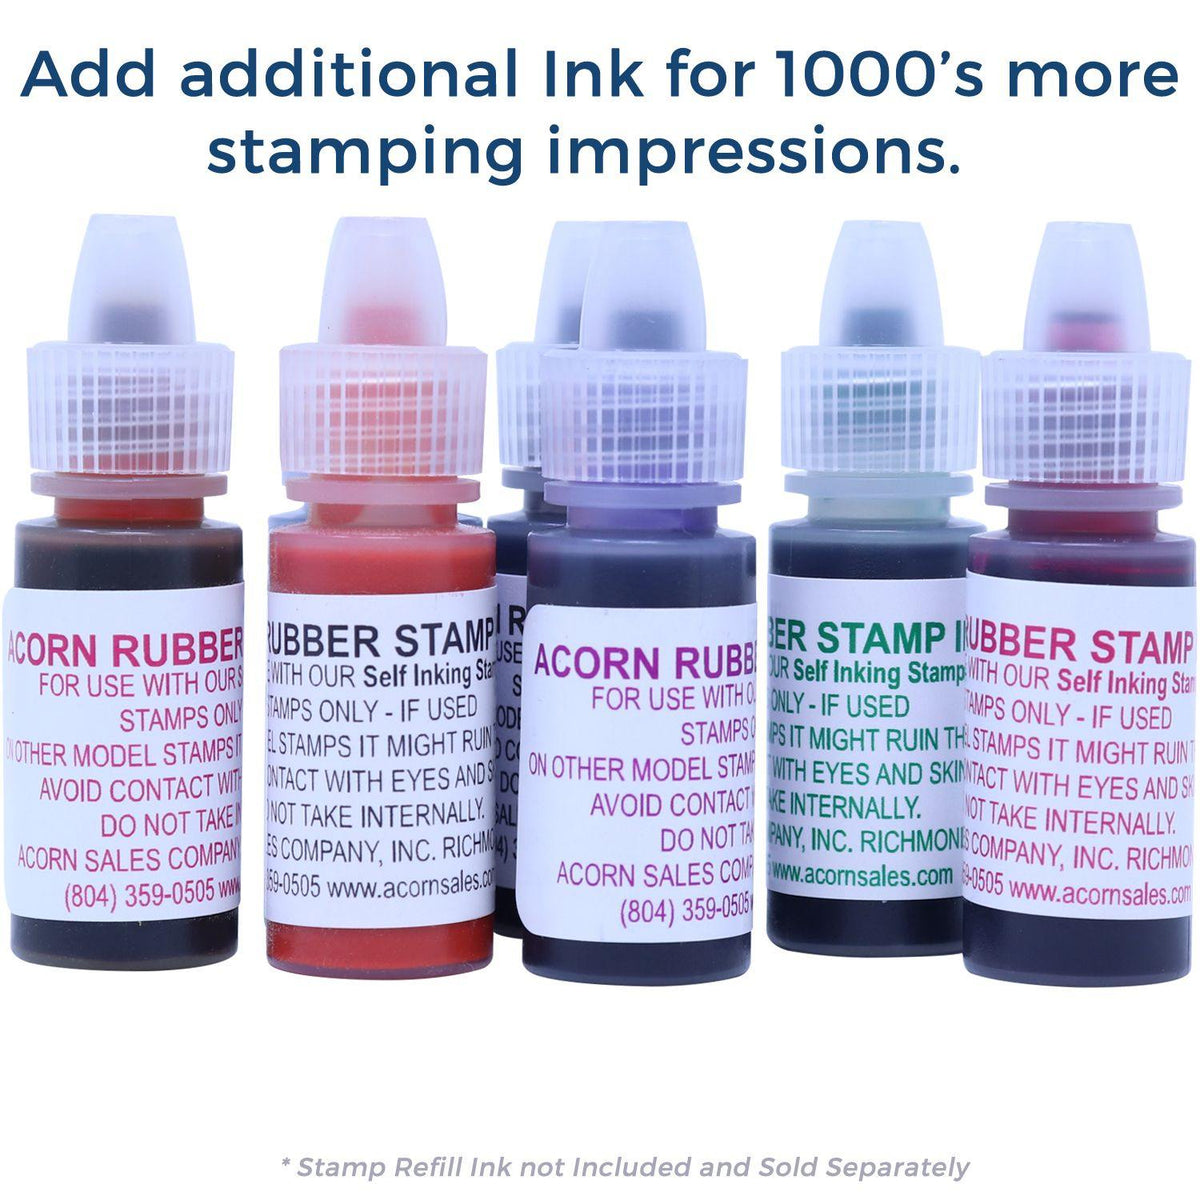 Refill Inks for Large Pre-Inked Great Job Stamp Available